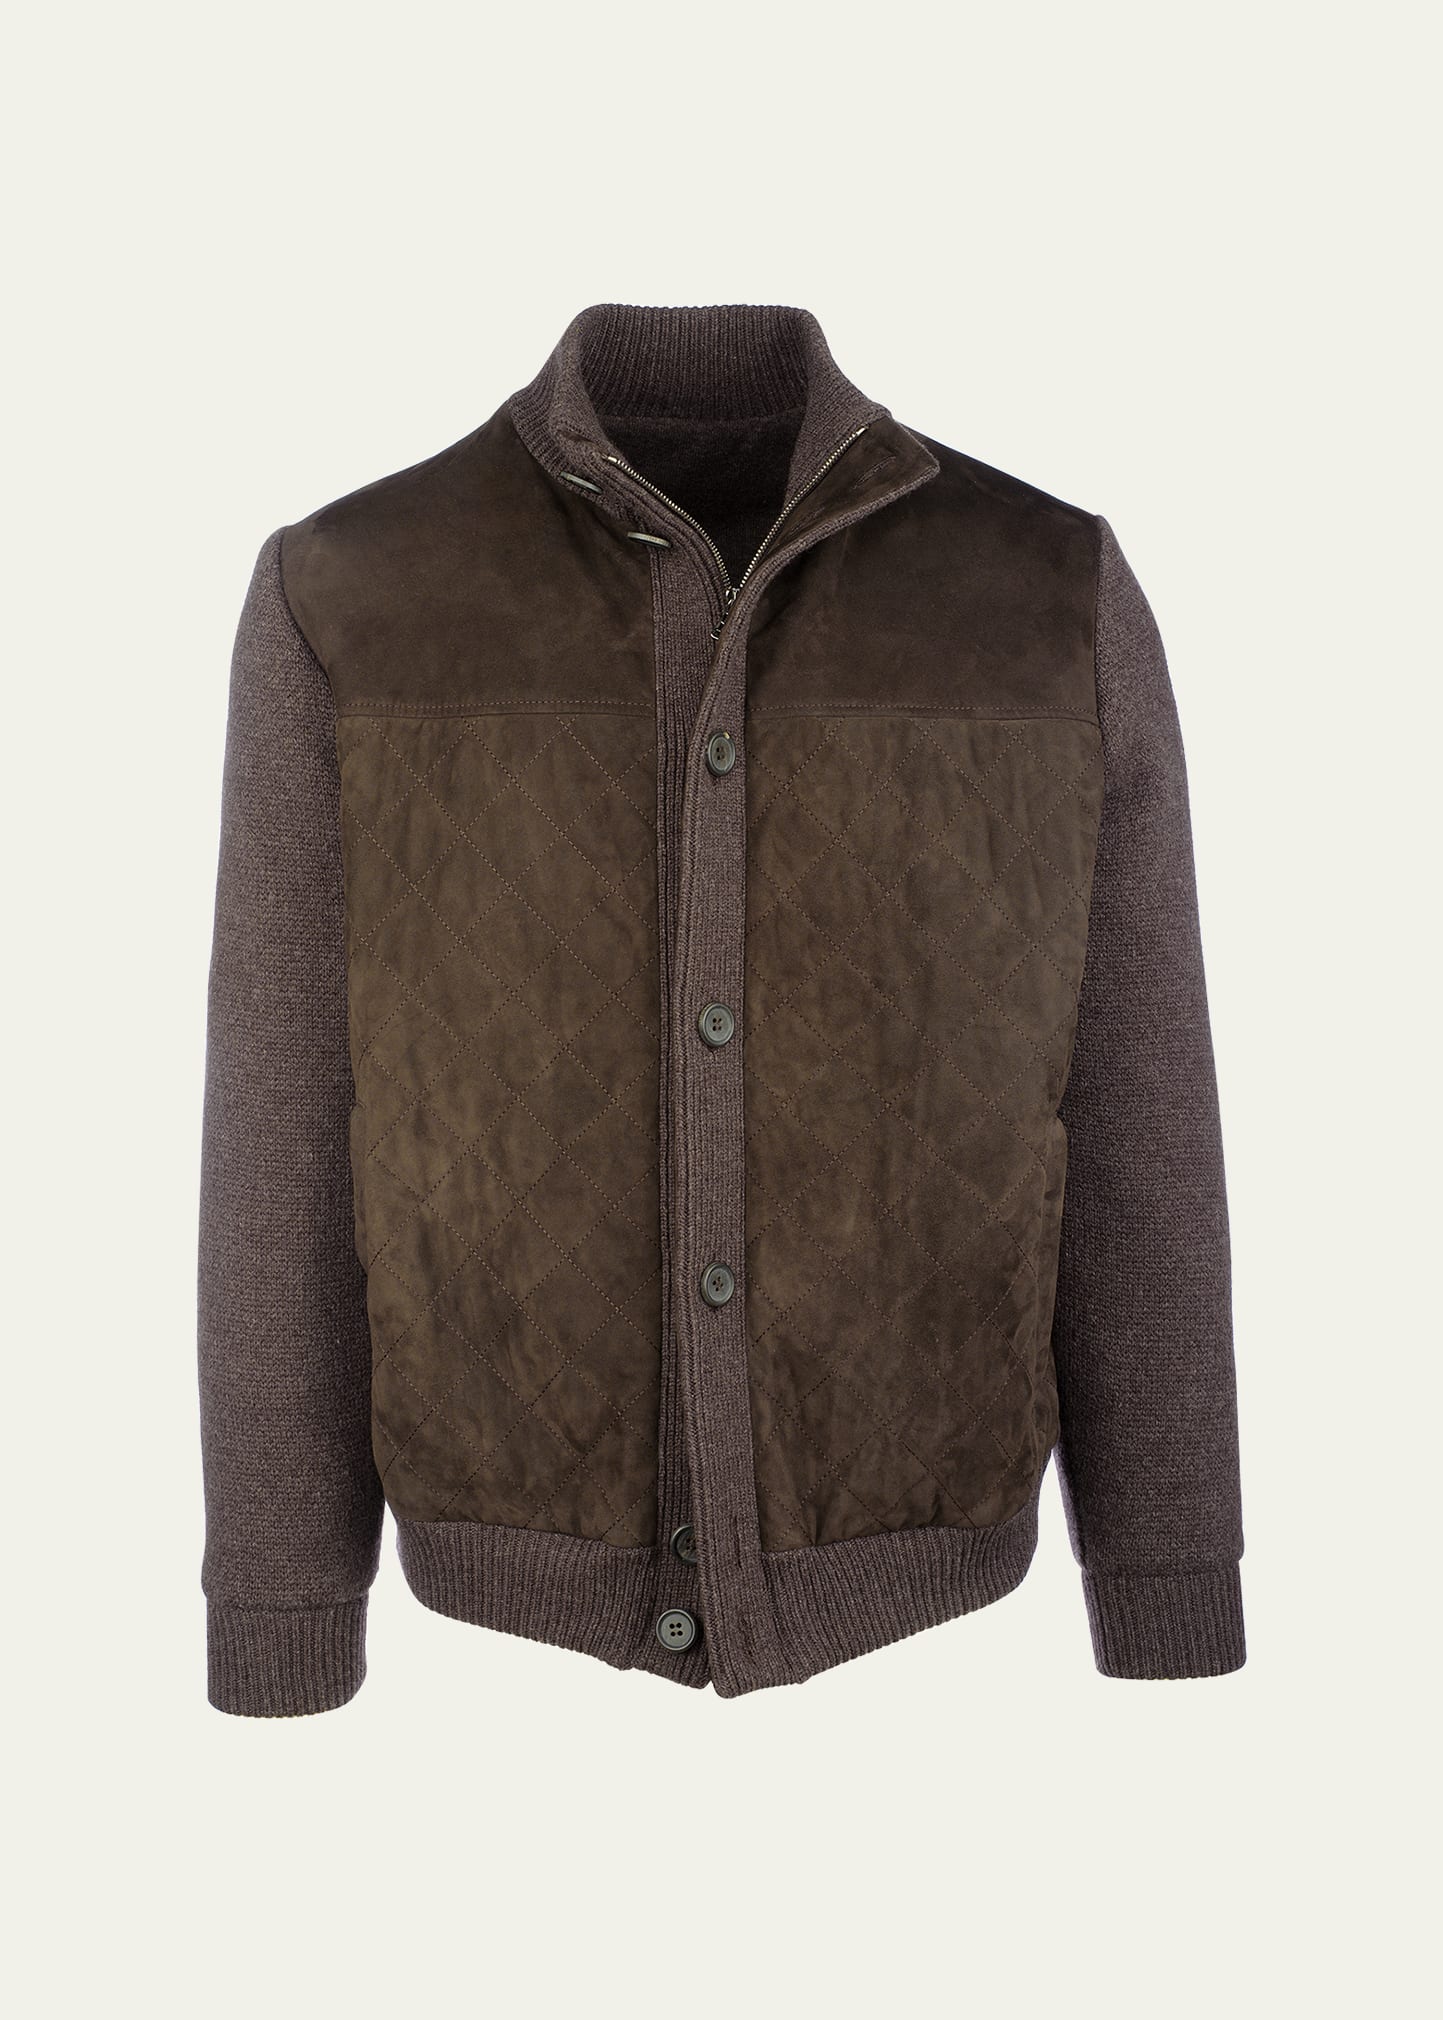 Men's Suede Bomber Jacket w/ Knit Sleeves